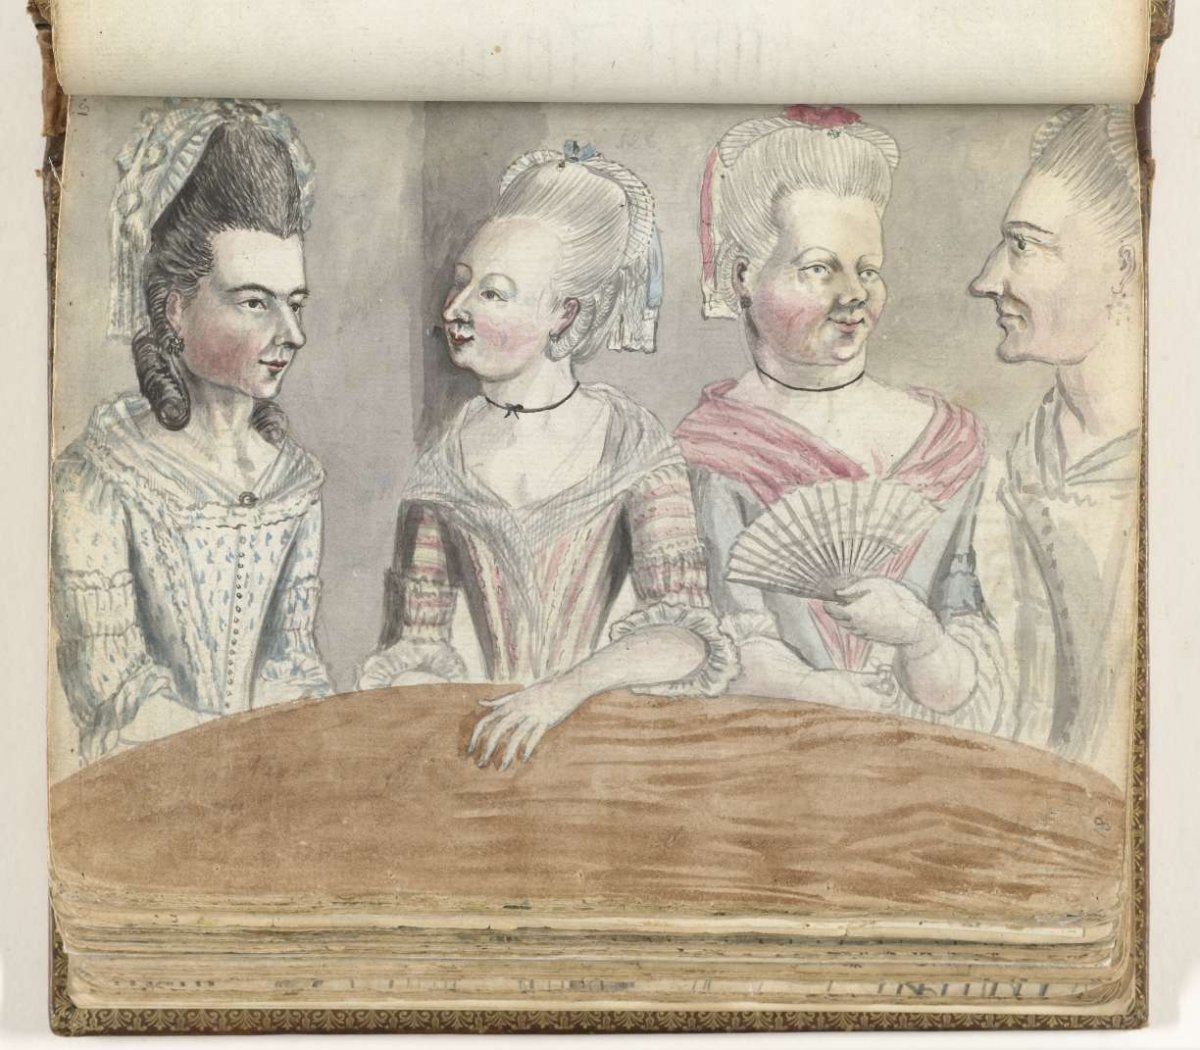 Four women at a table during trip to Falmouth, Jan Brandes, 1778